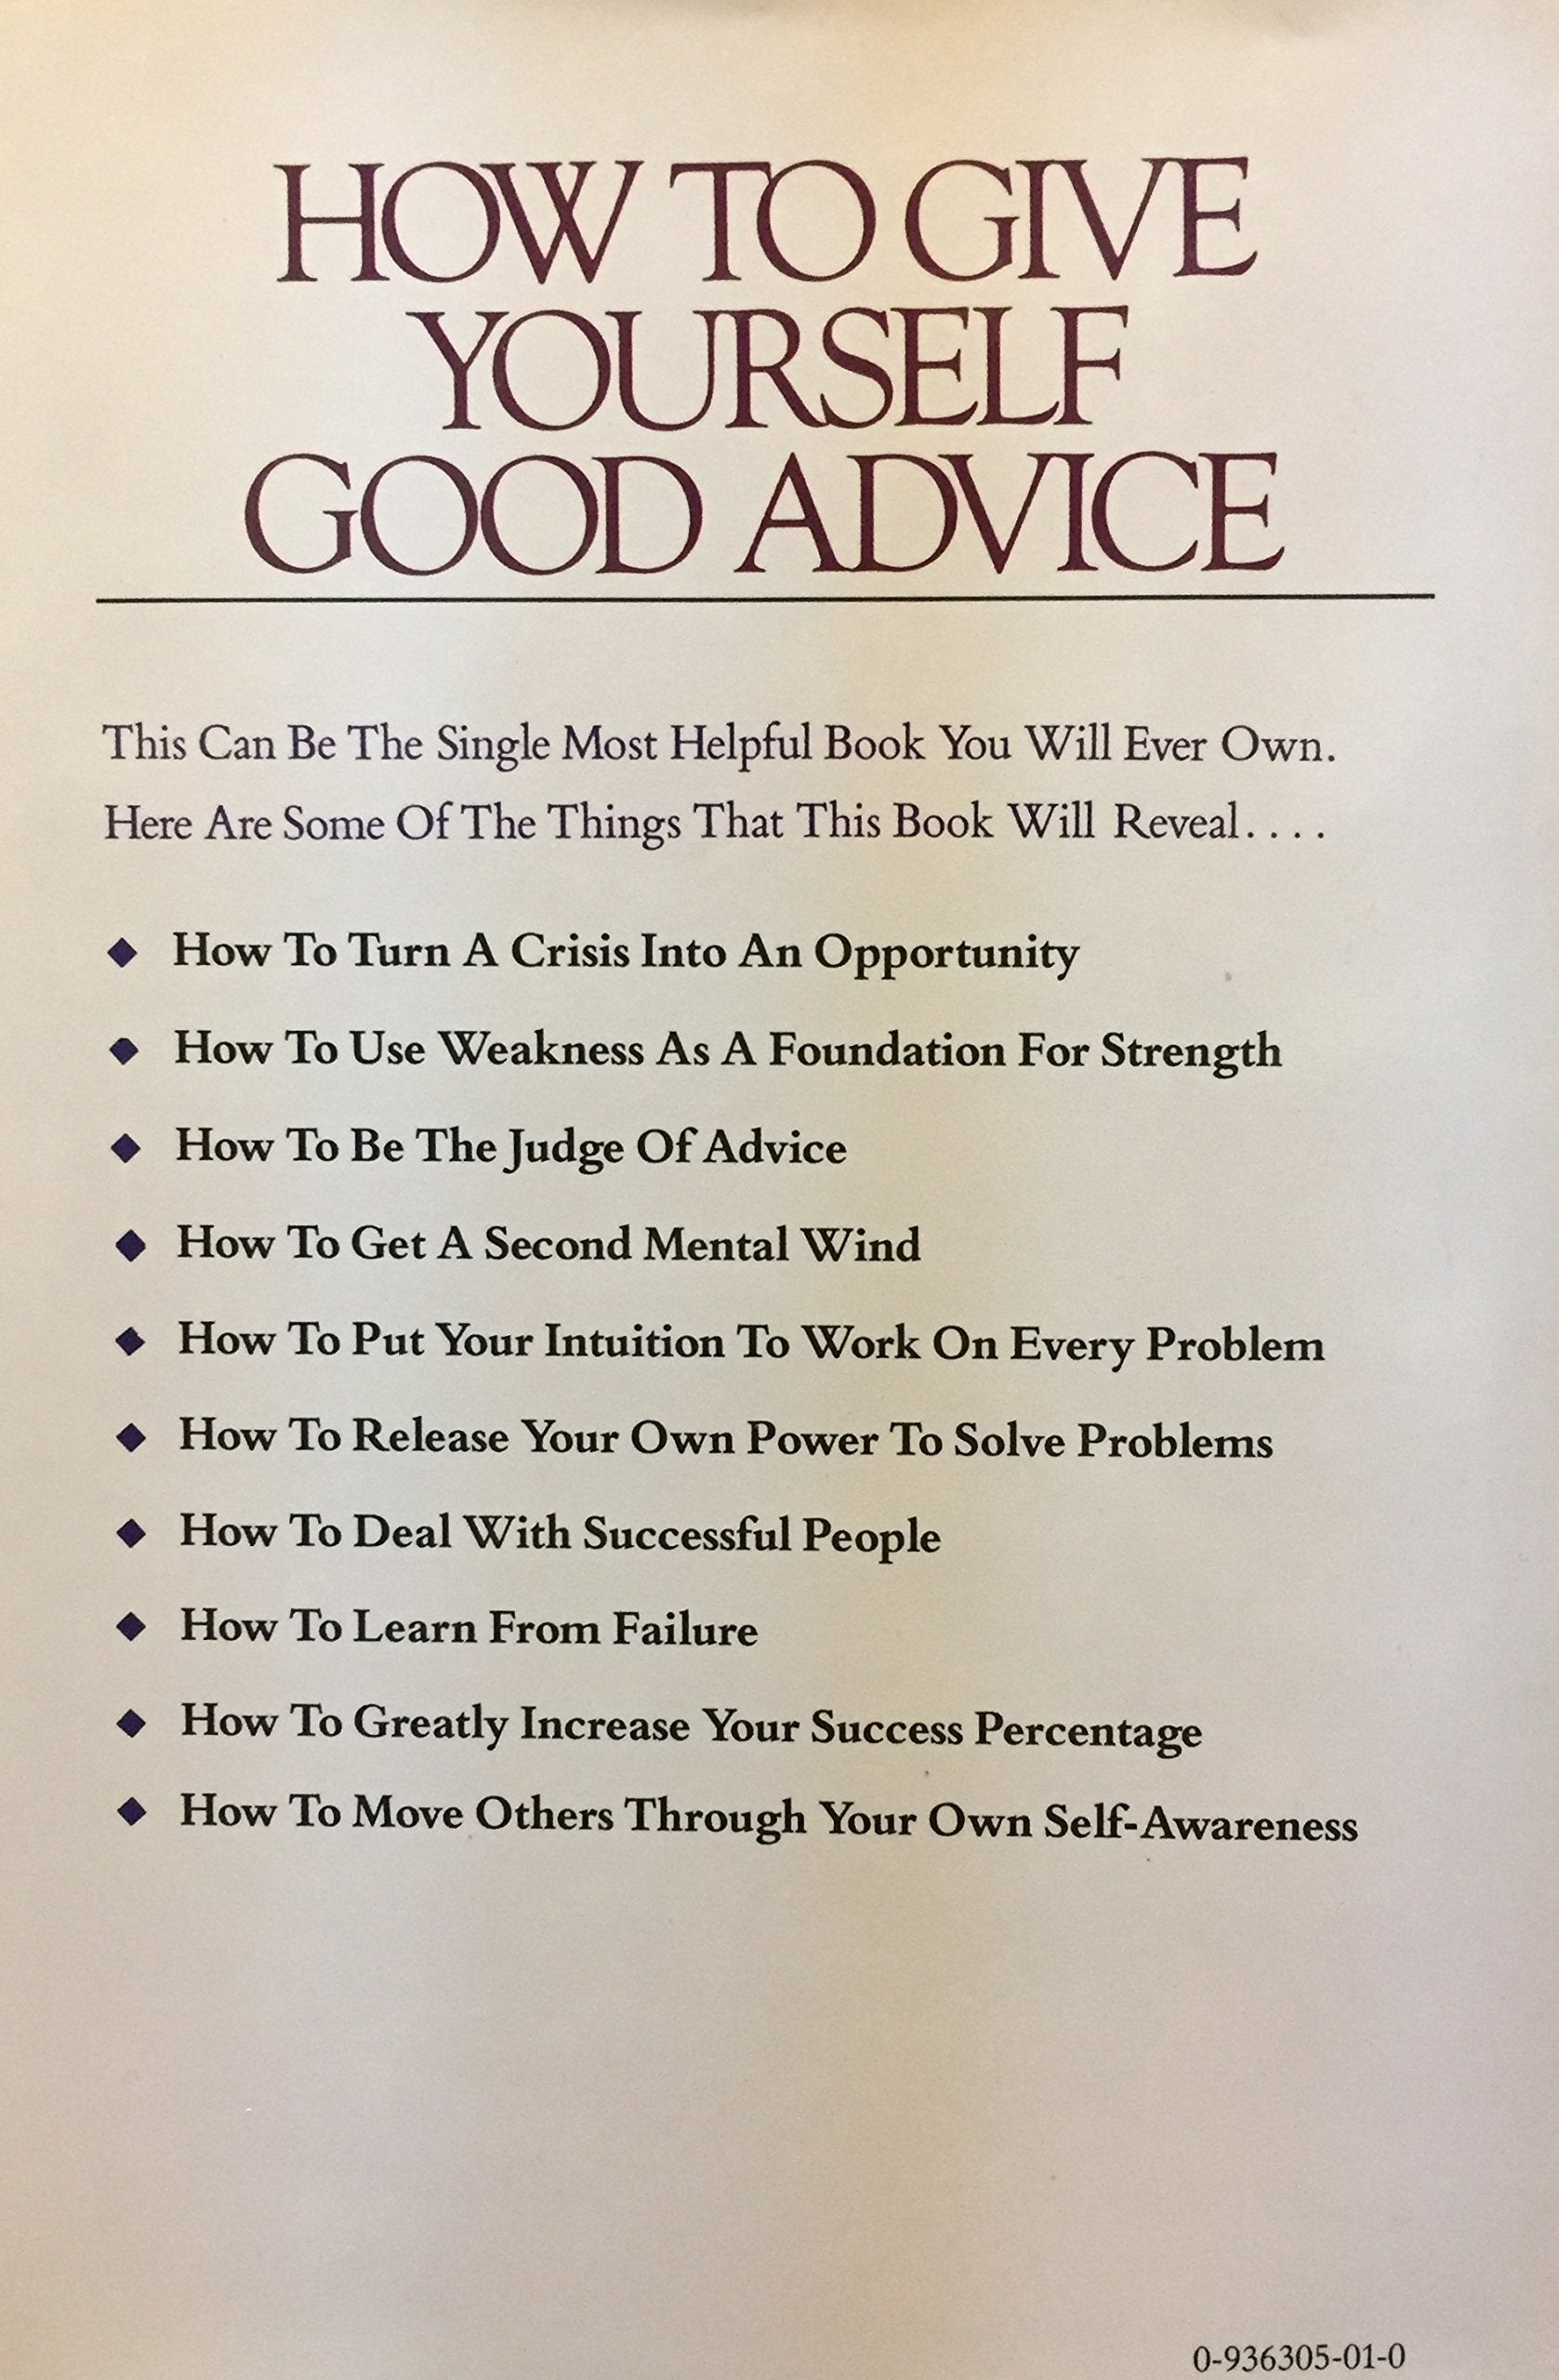 How to Give Yourself Good Advice (Gerard Nierenberg)